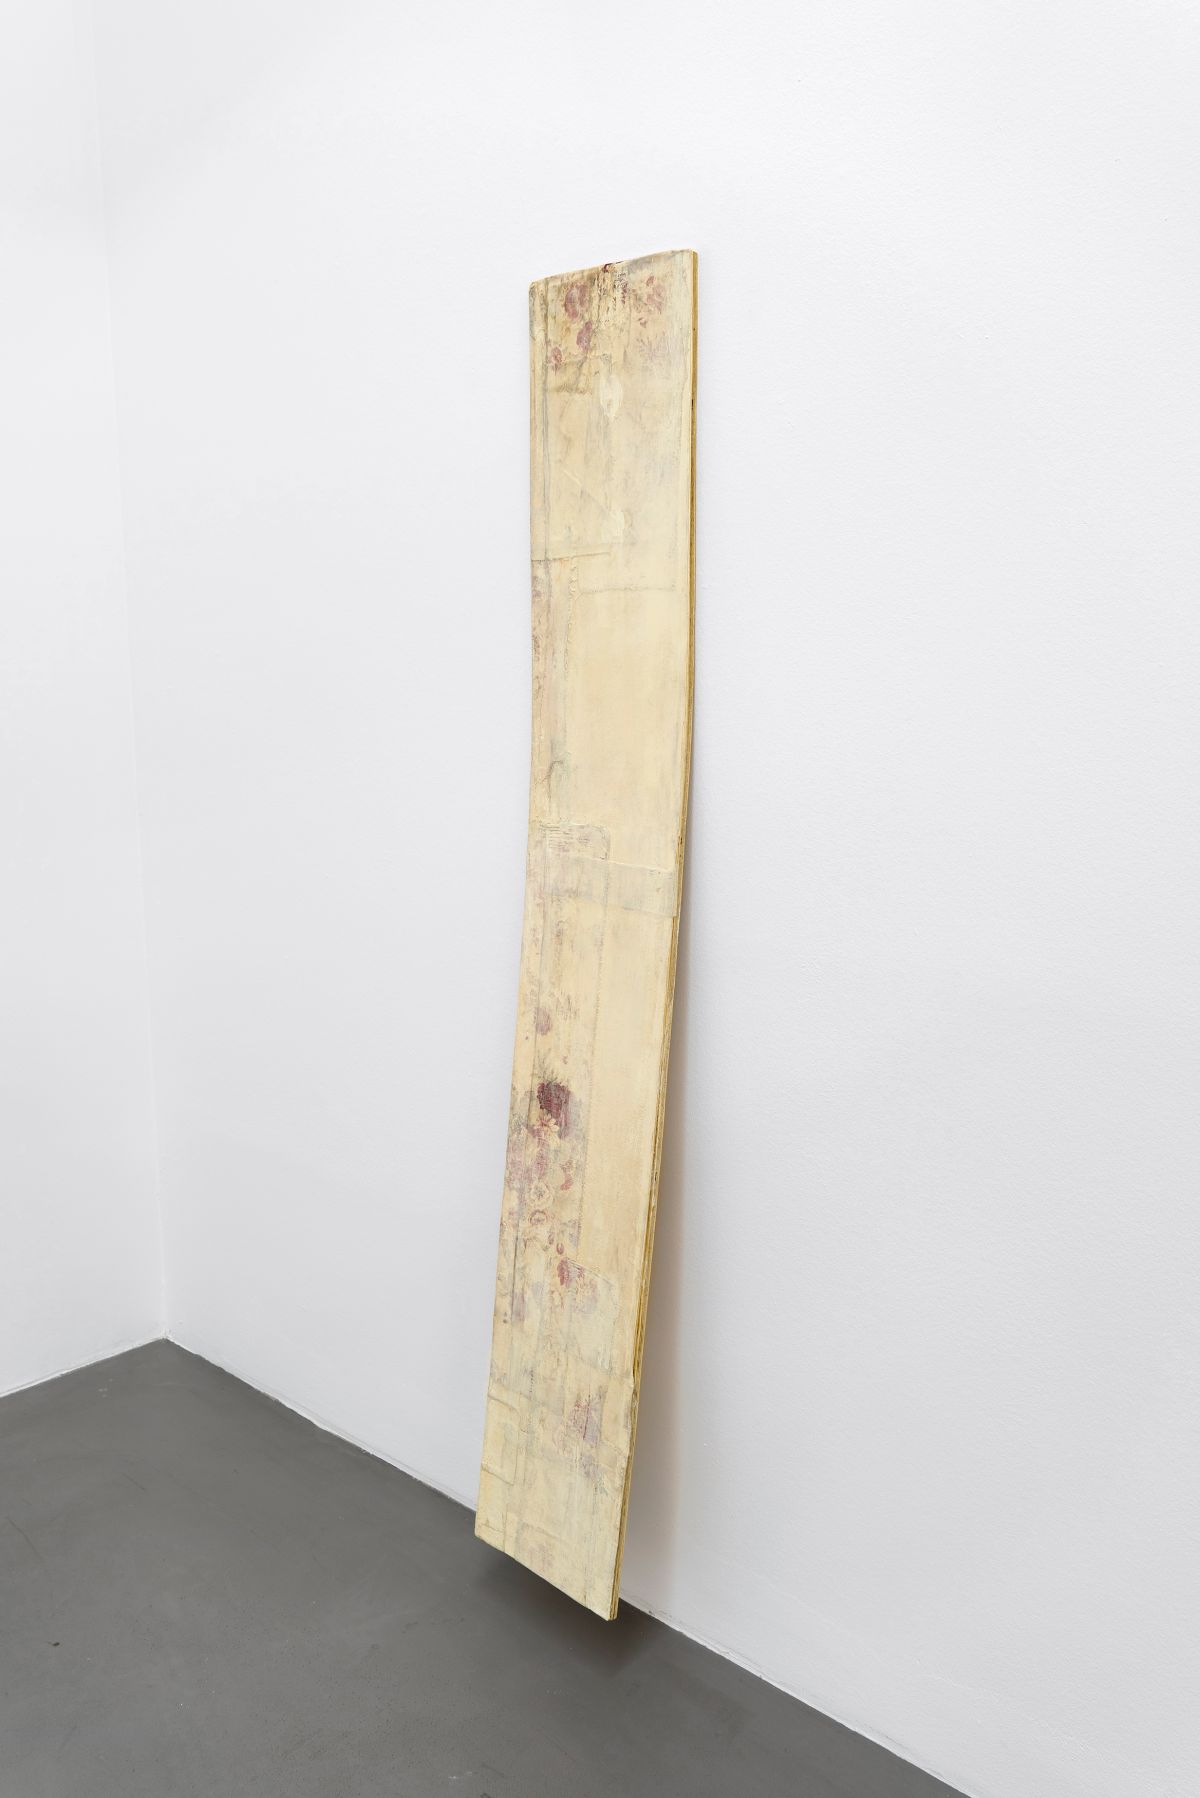 Lawrence Carroll, ‘Untitled (slide painting)’, 2013